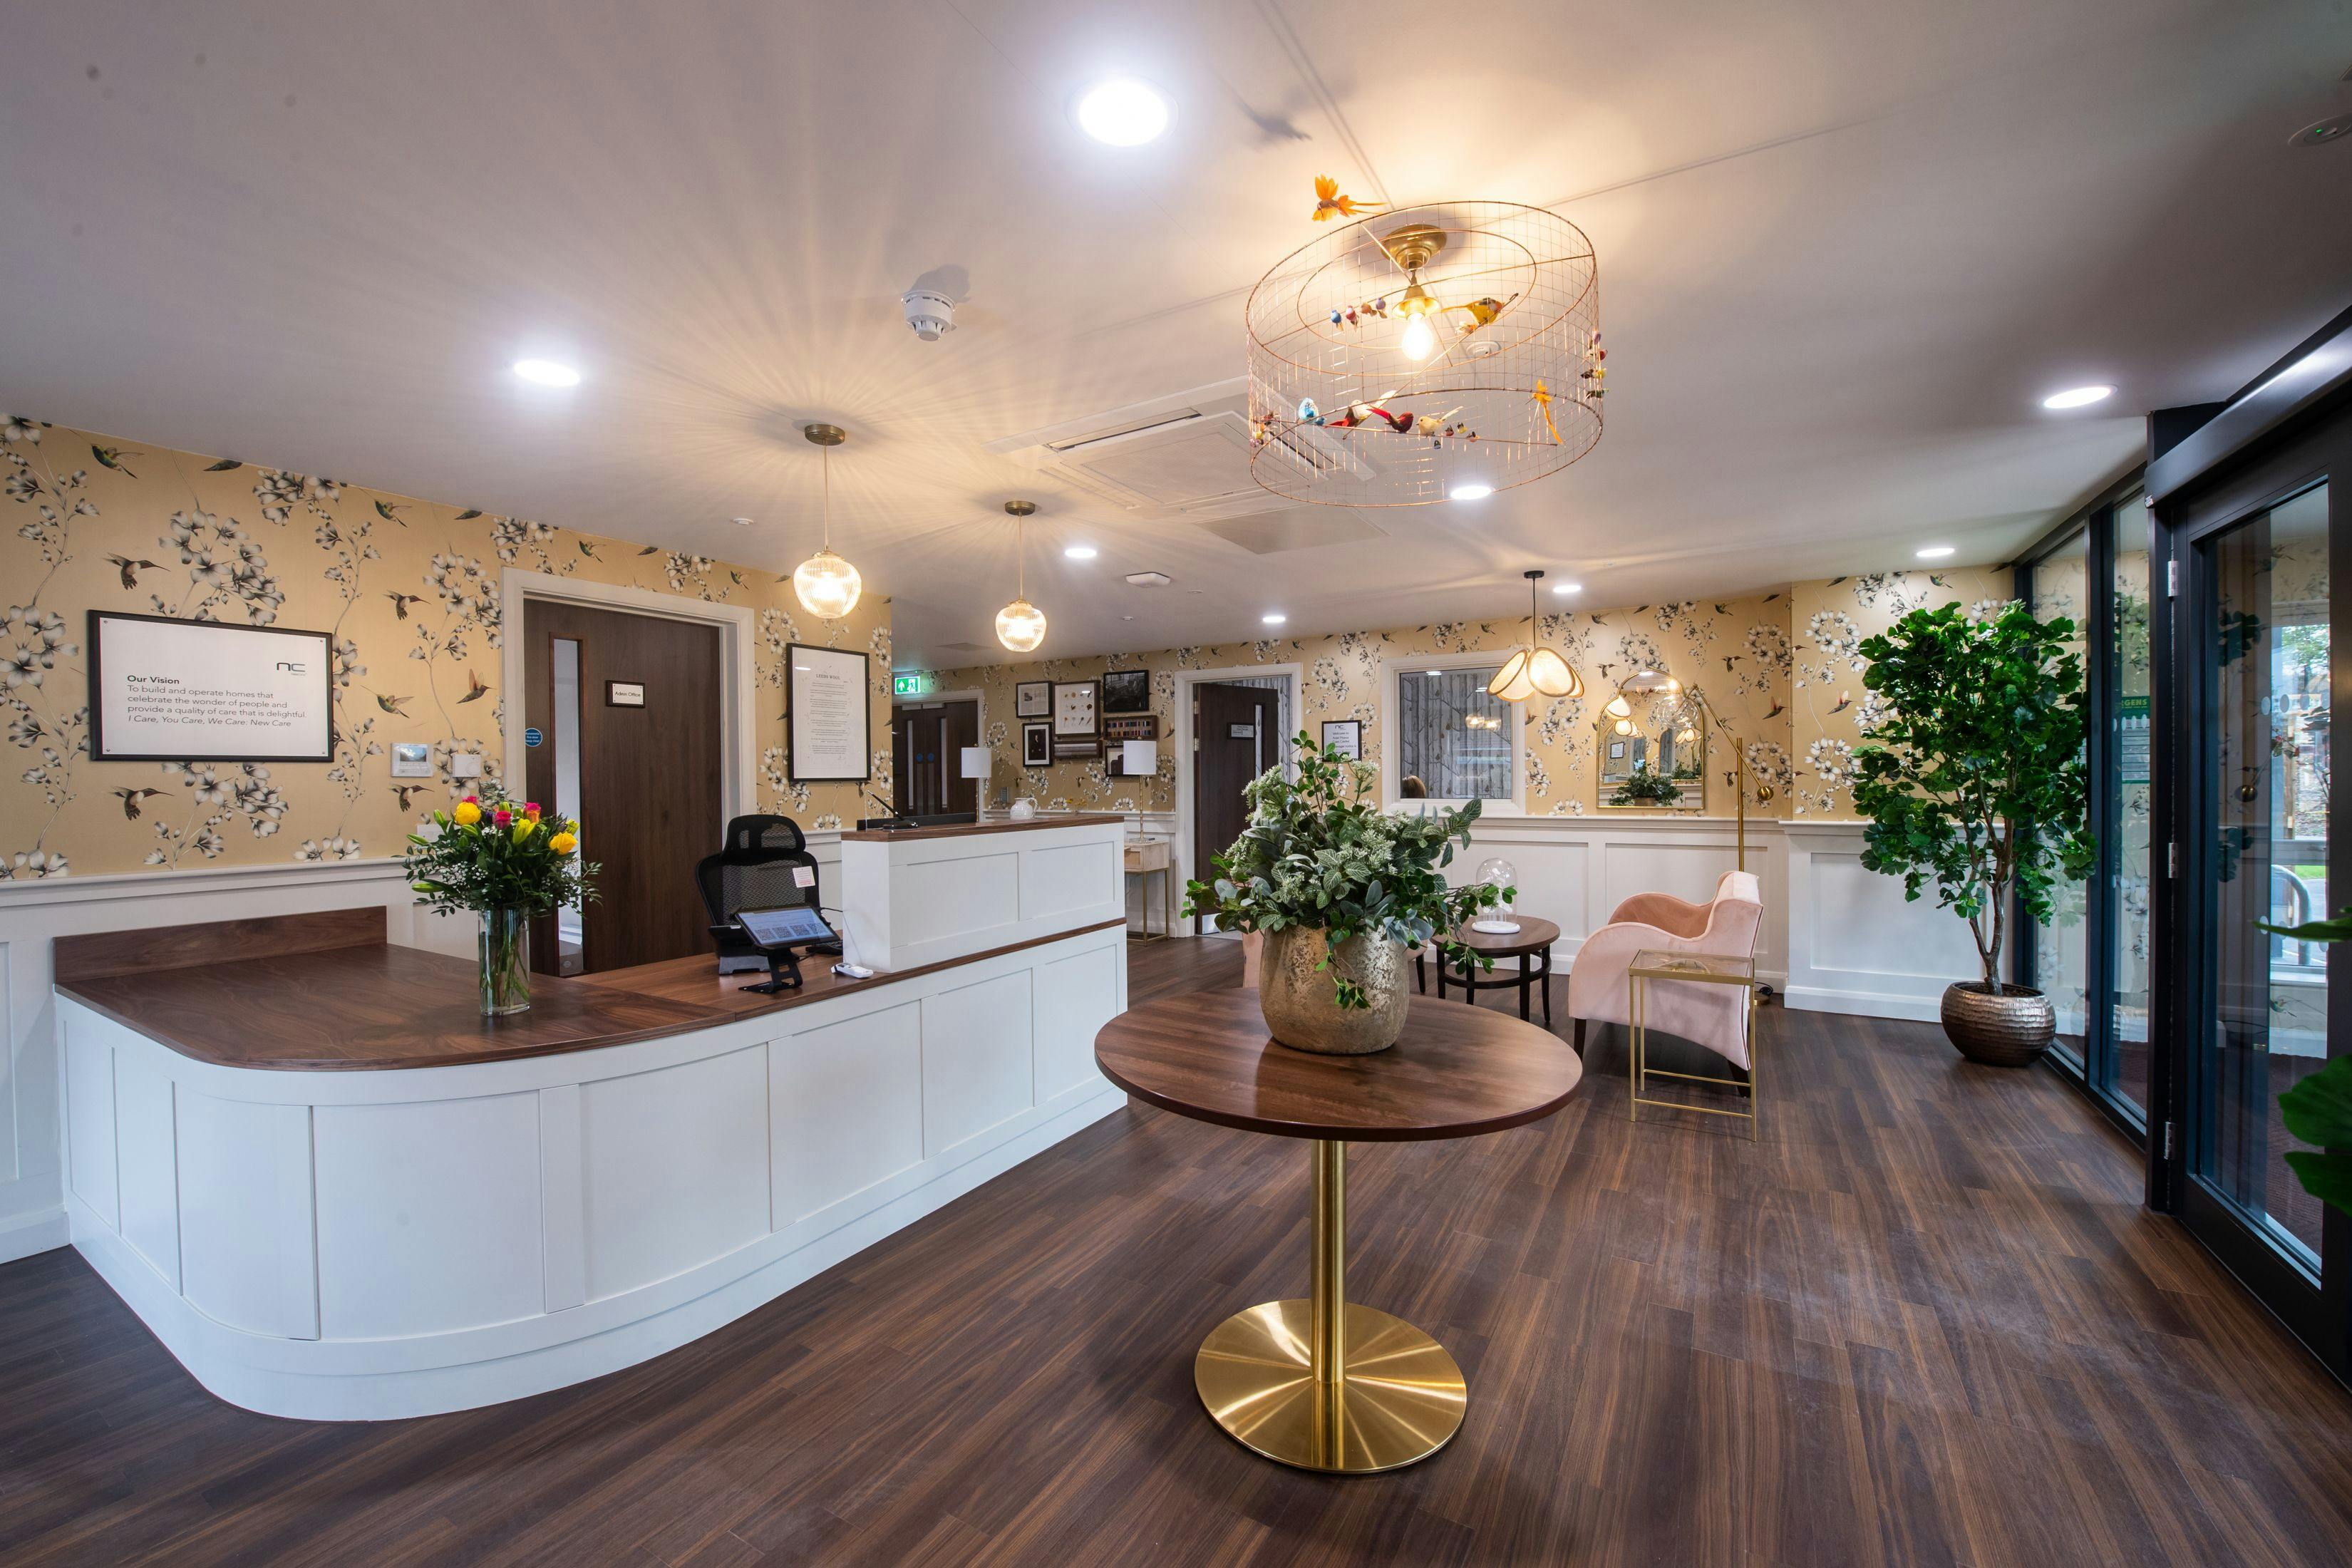 New Care - Adel Manor care home 4